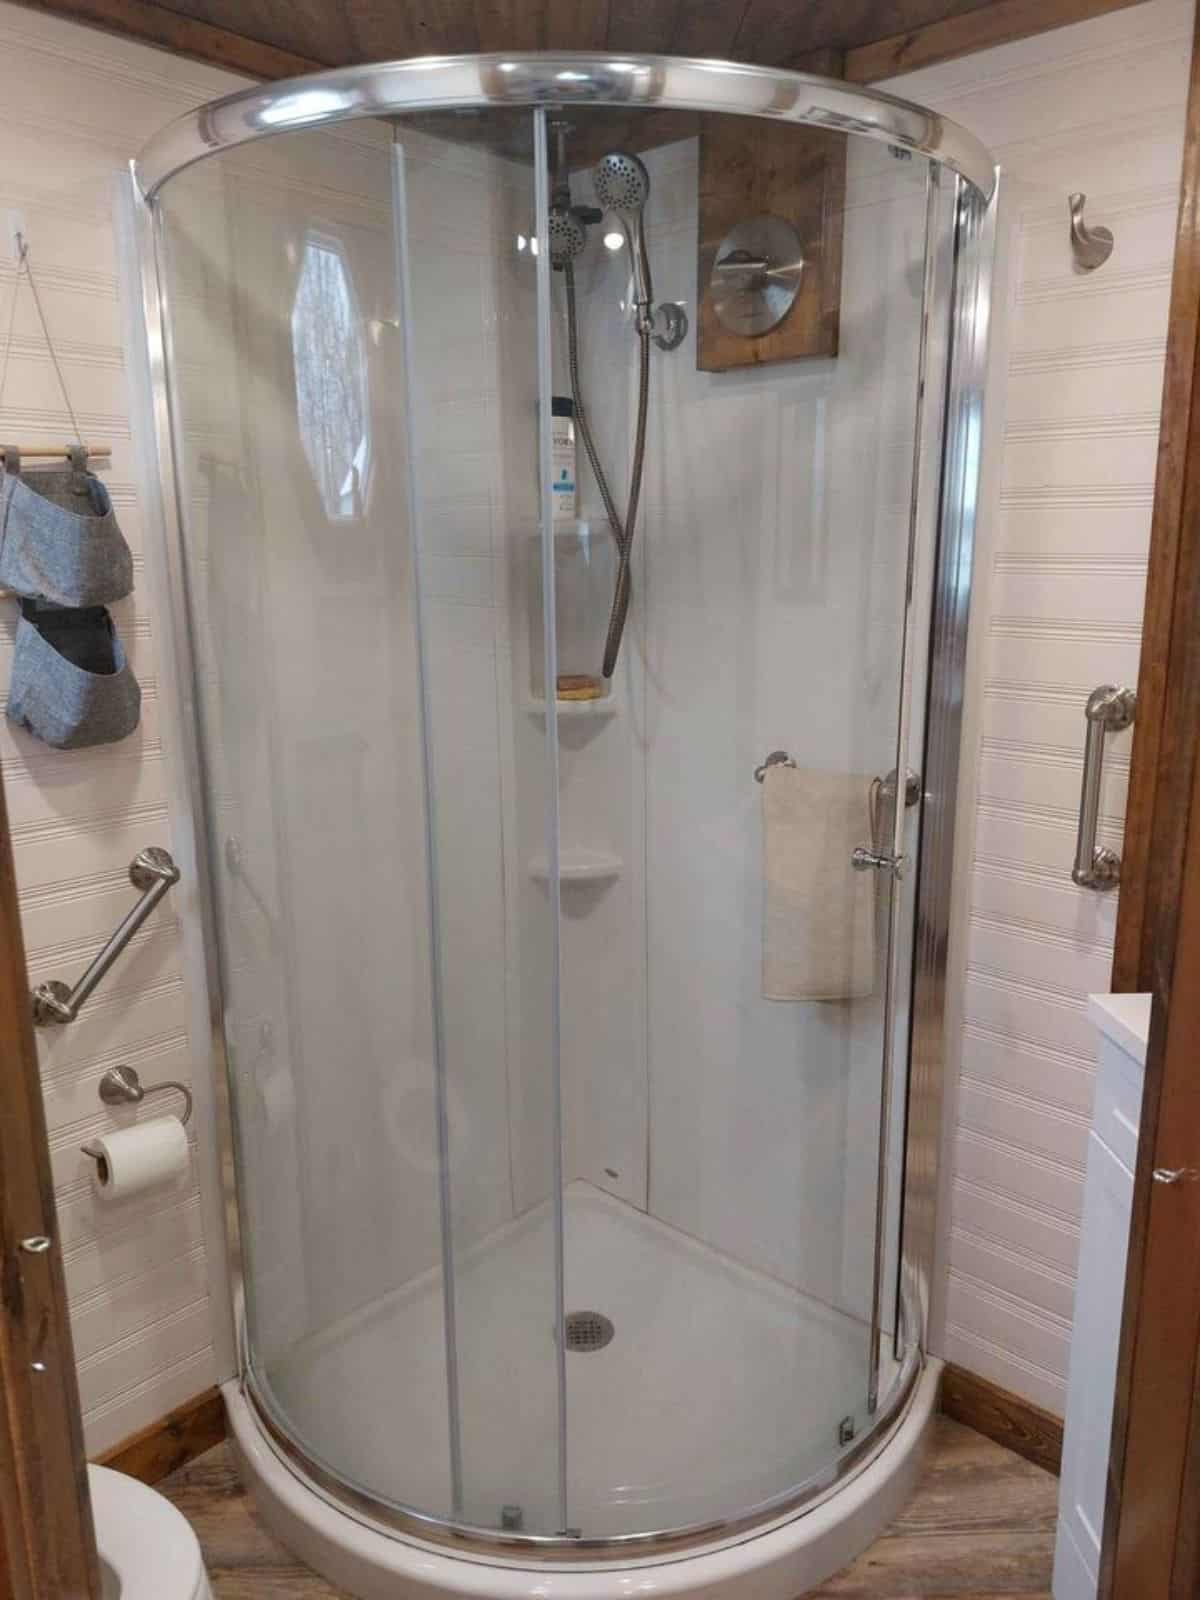 Separate shower area with glass doors in bathroom